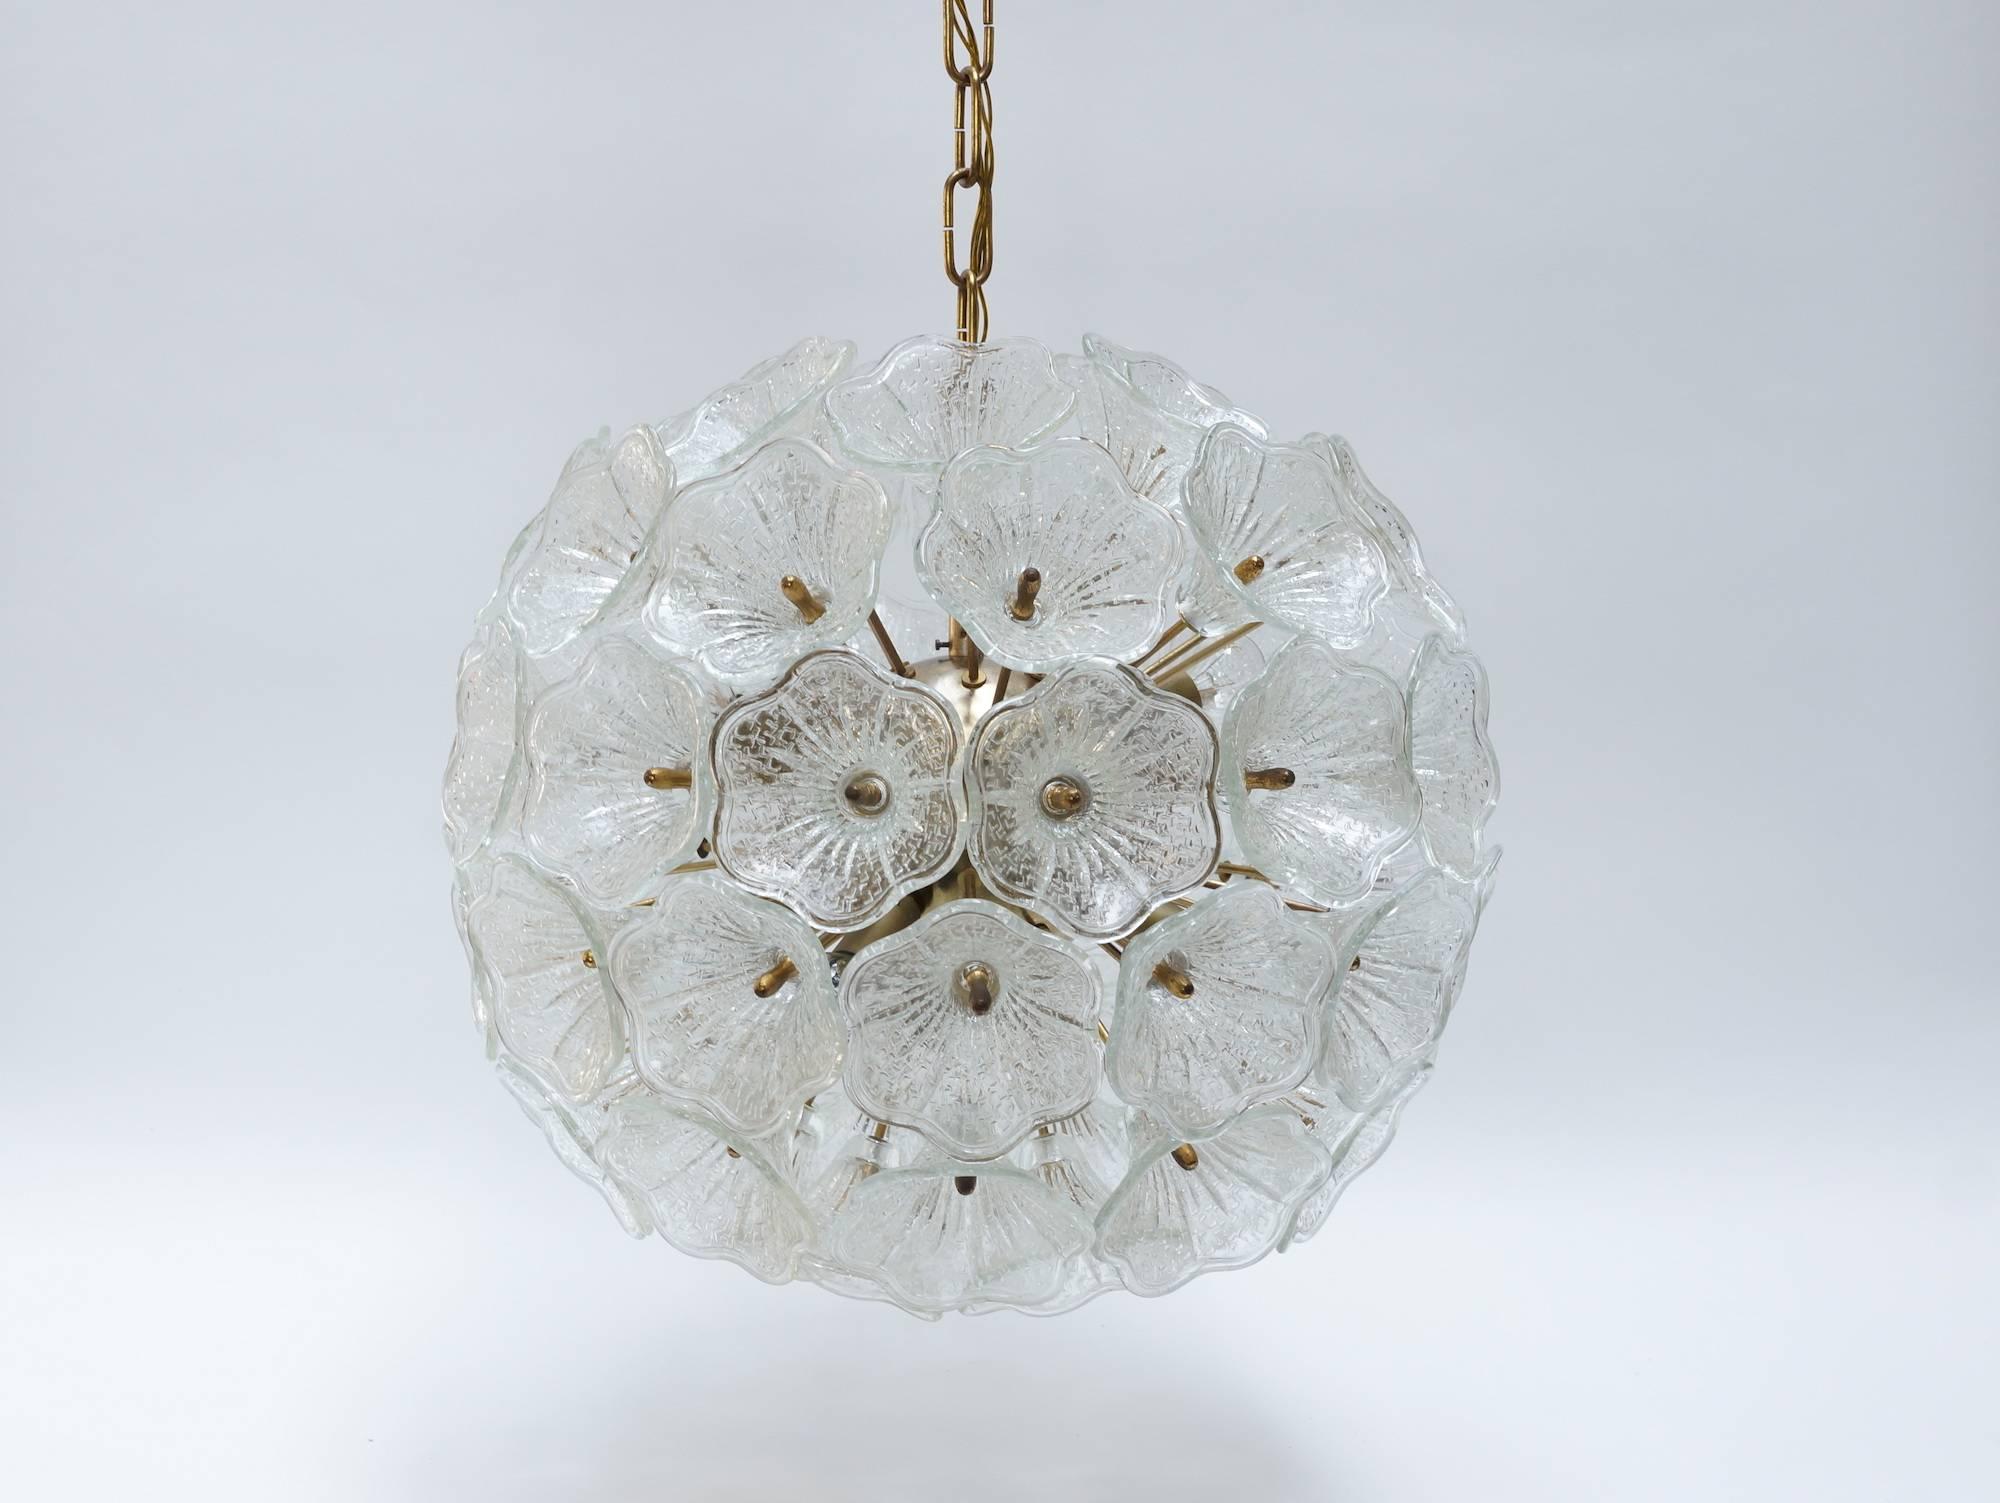 Beautiful Glass Murano Sputnik with 56 glass flowers on a brass Sputnik base in very good condition. Designed in 1960s Sputnik lamp by Glass Studio Murano Italy. The lamp is great when its out but gorgeous when it lights. The Sputnik has in total